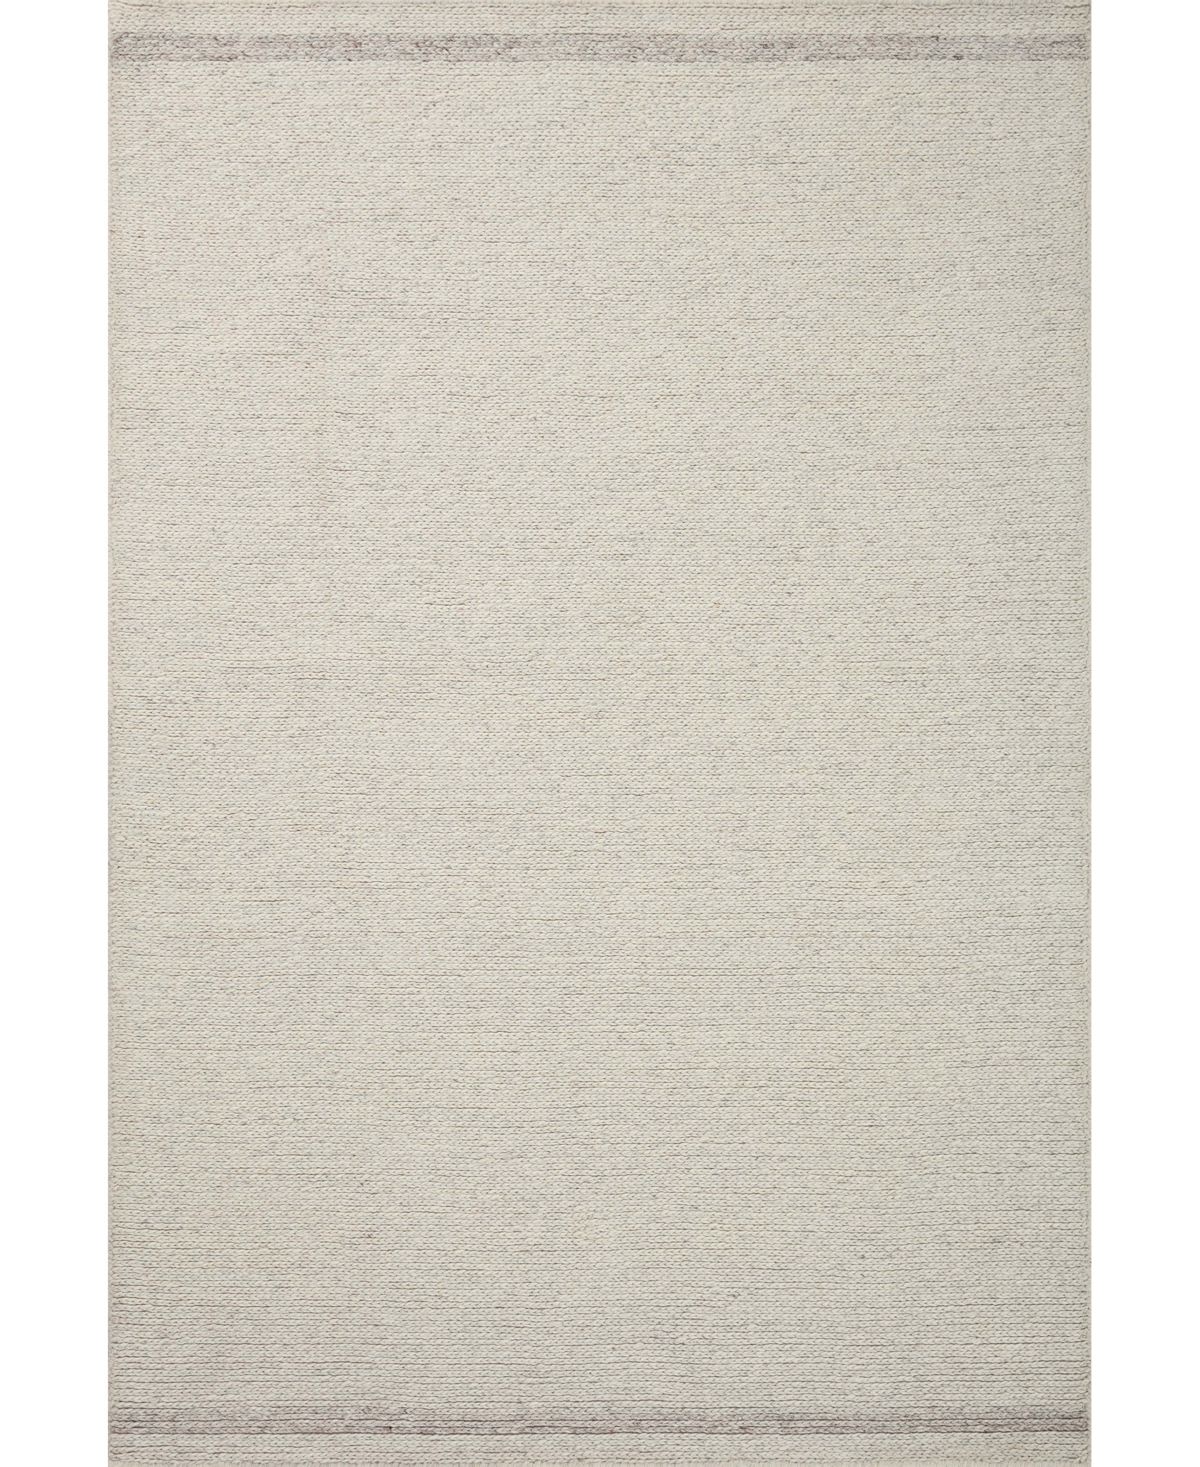 Magnolia Home By Joanna Gaines X Loloi Ashby Ash-02 3'6" X 5'6" Area Rug In Mist